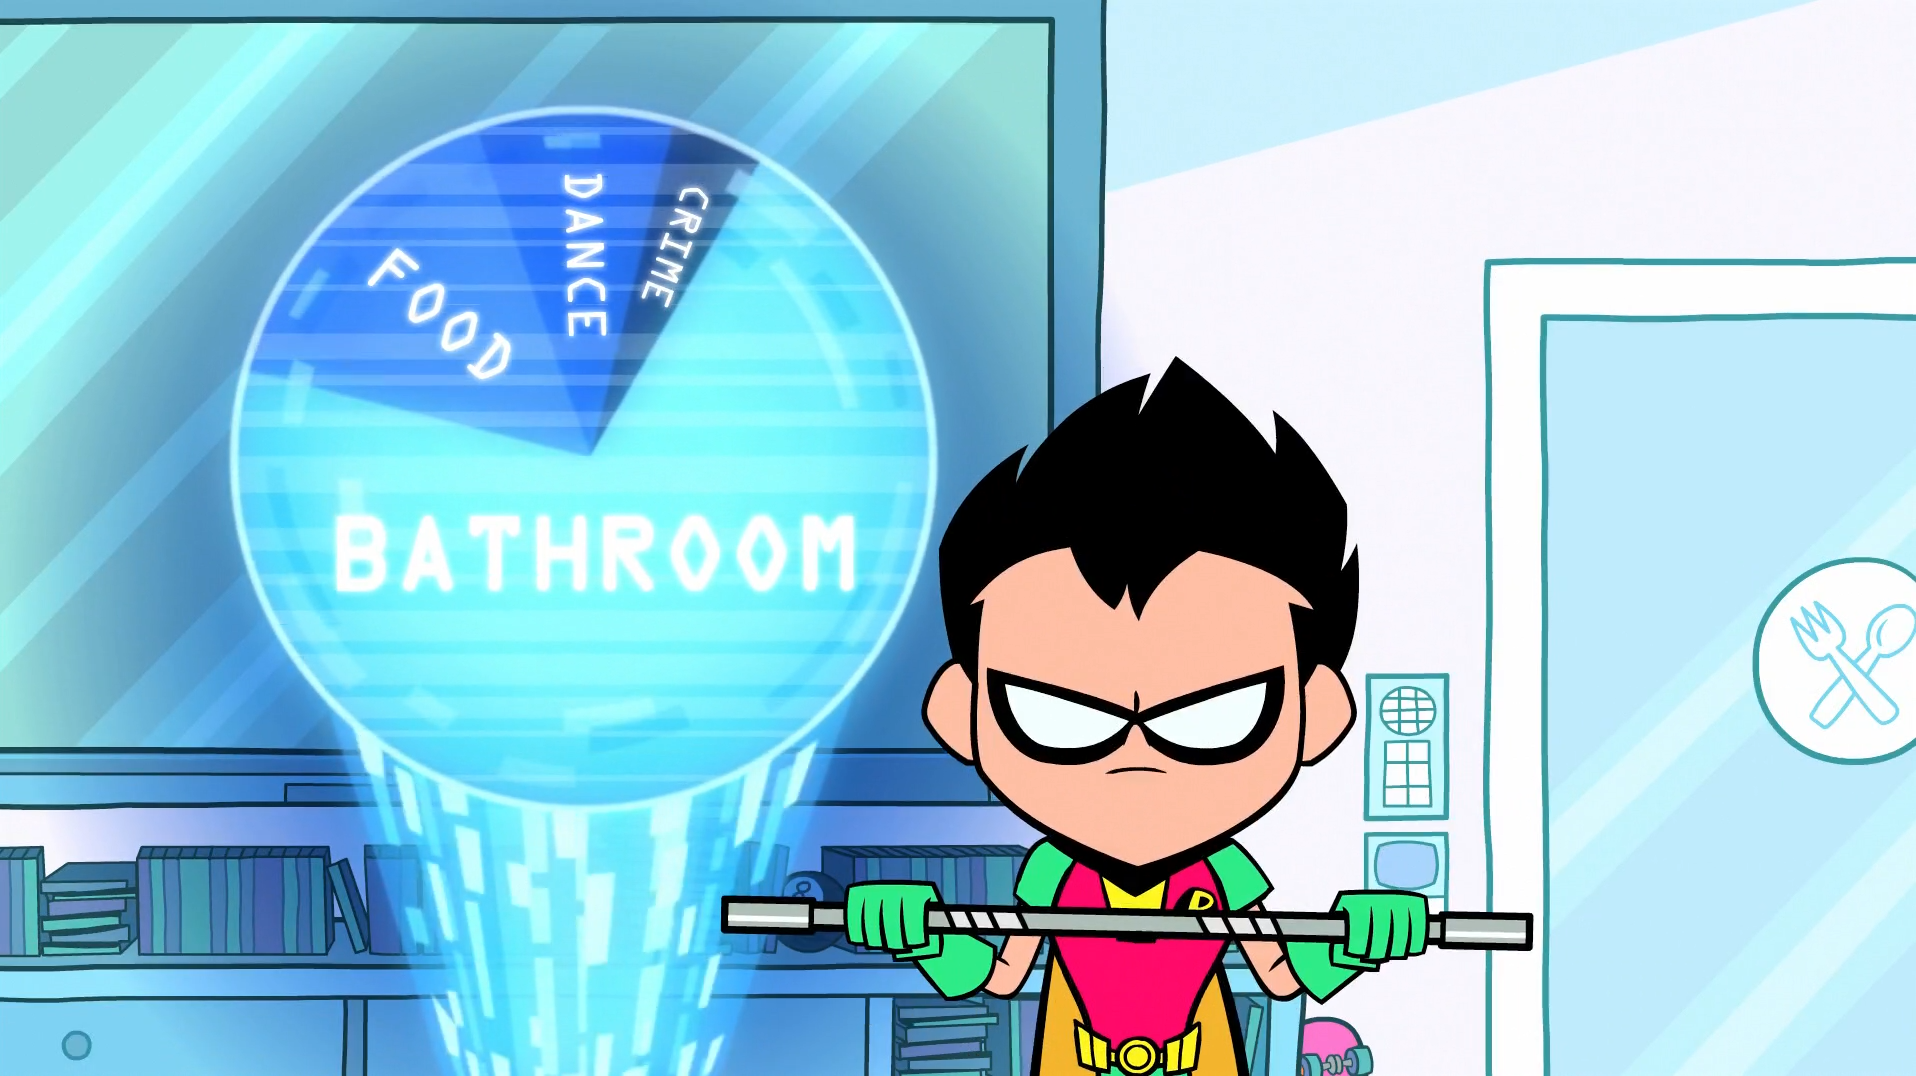 Use The Bathroom PNG - 158923